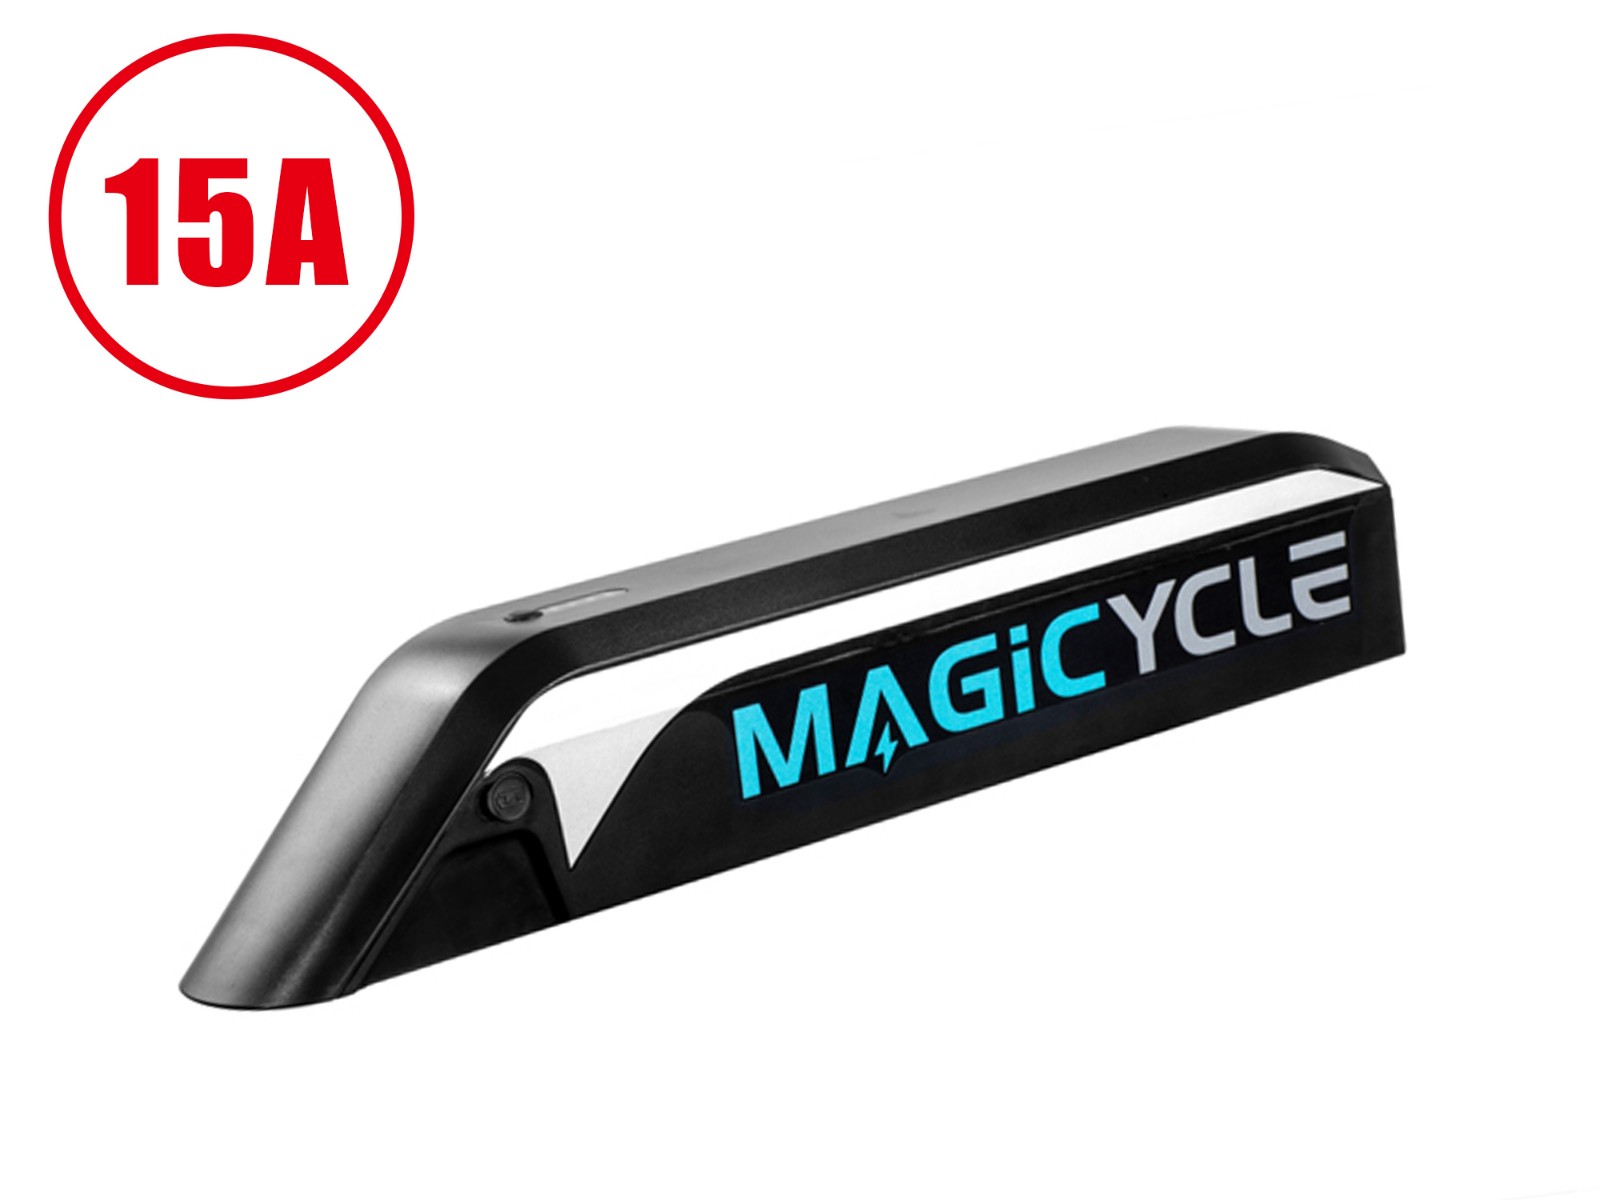 MAGICYCLE Cruiser/Cruiser Pro E-bike Battery - Canada Only